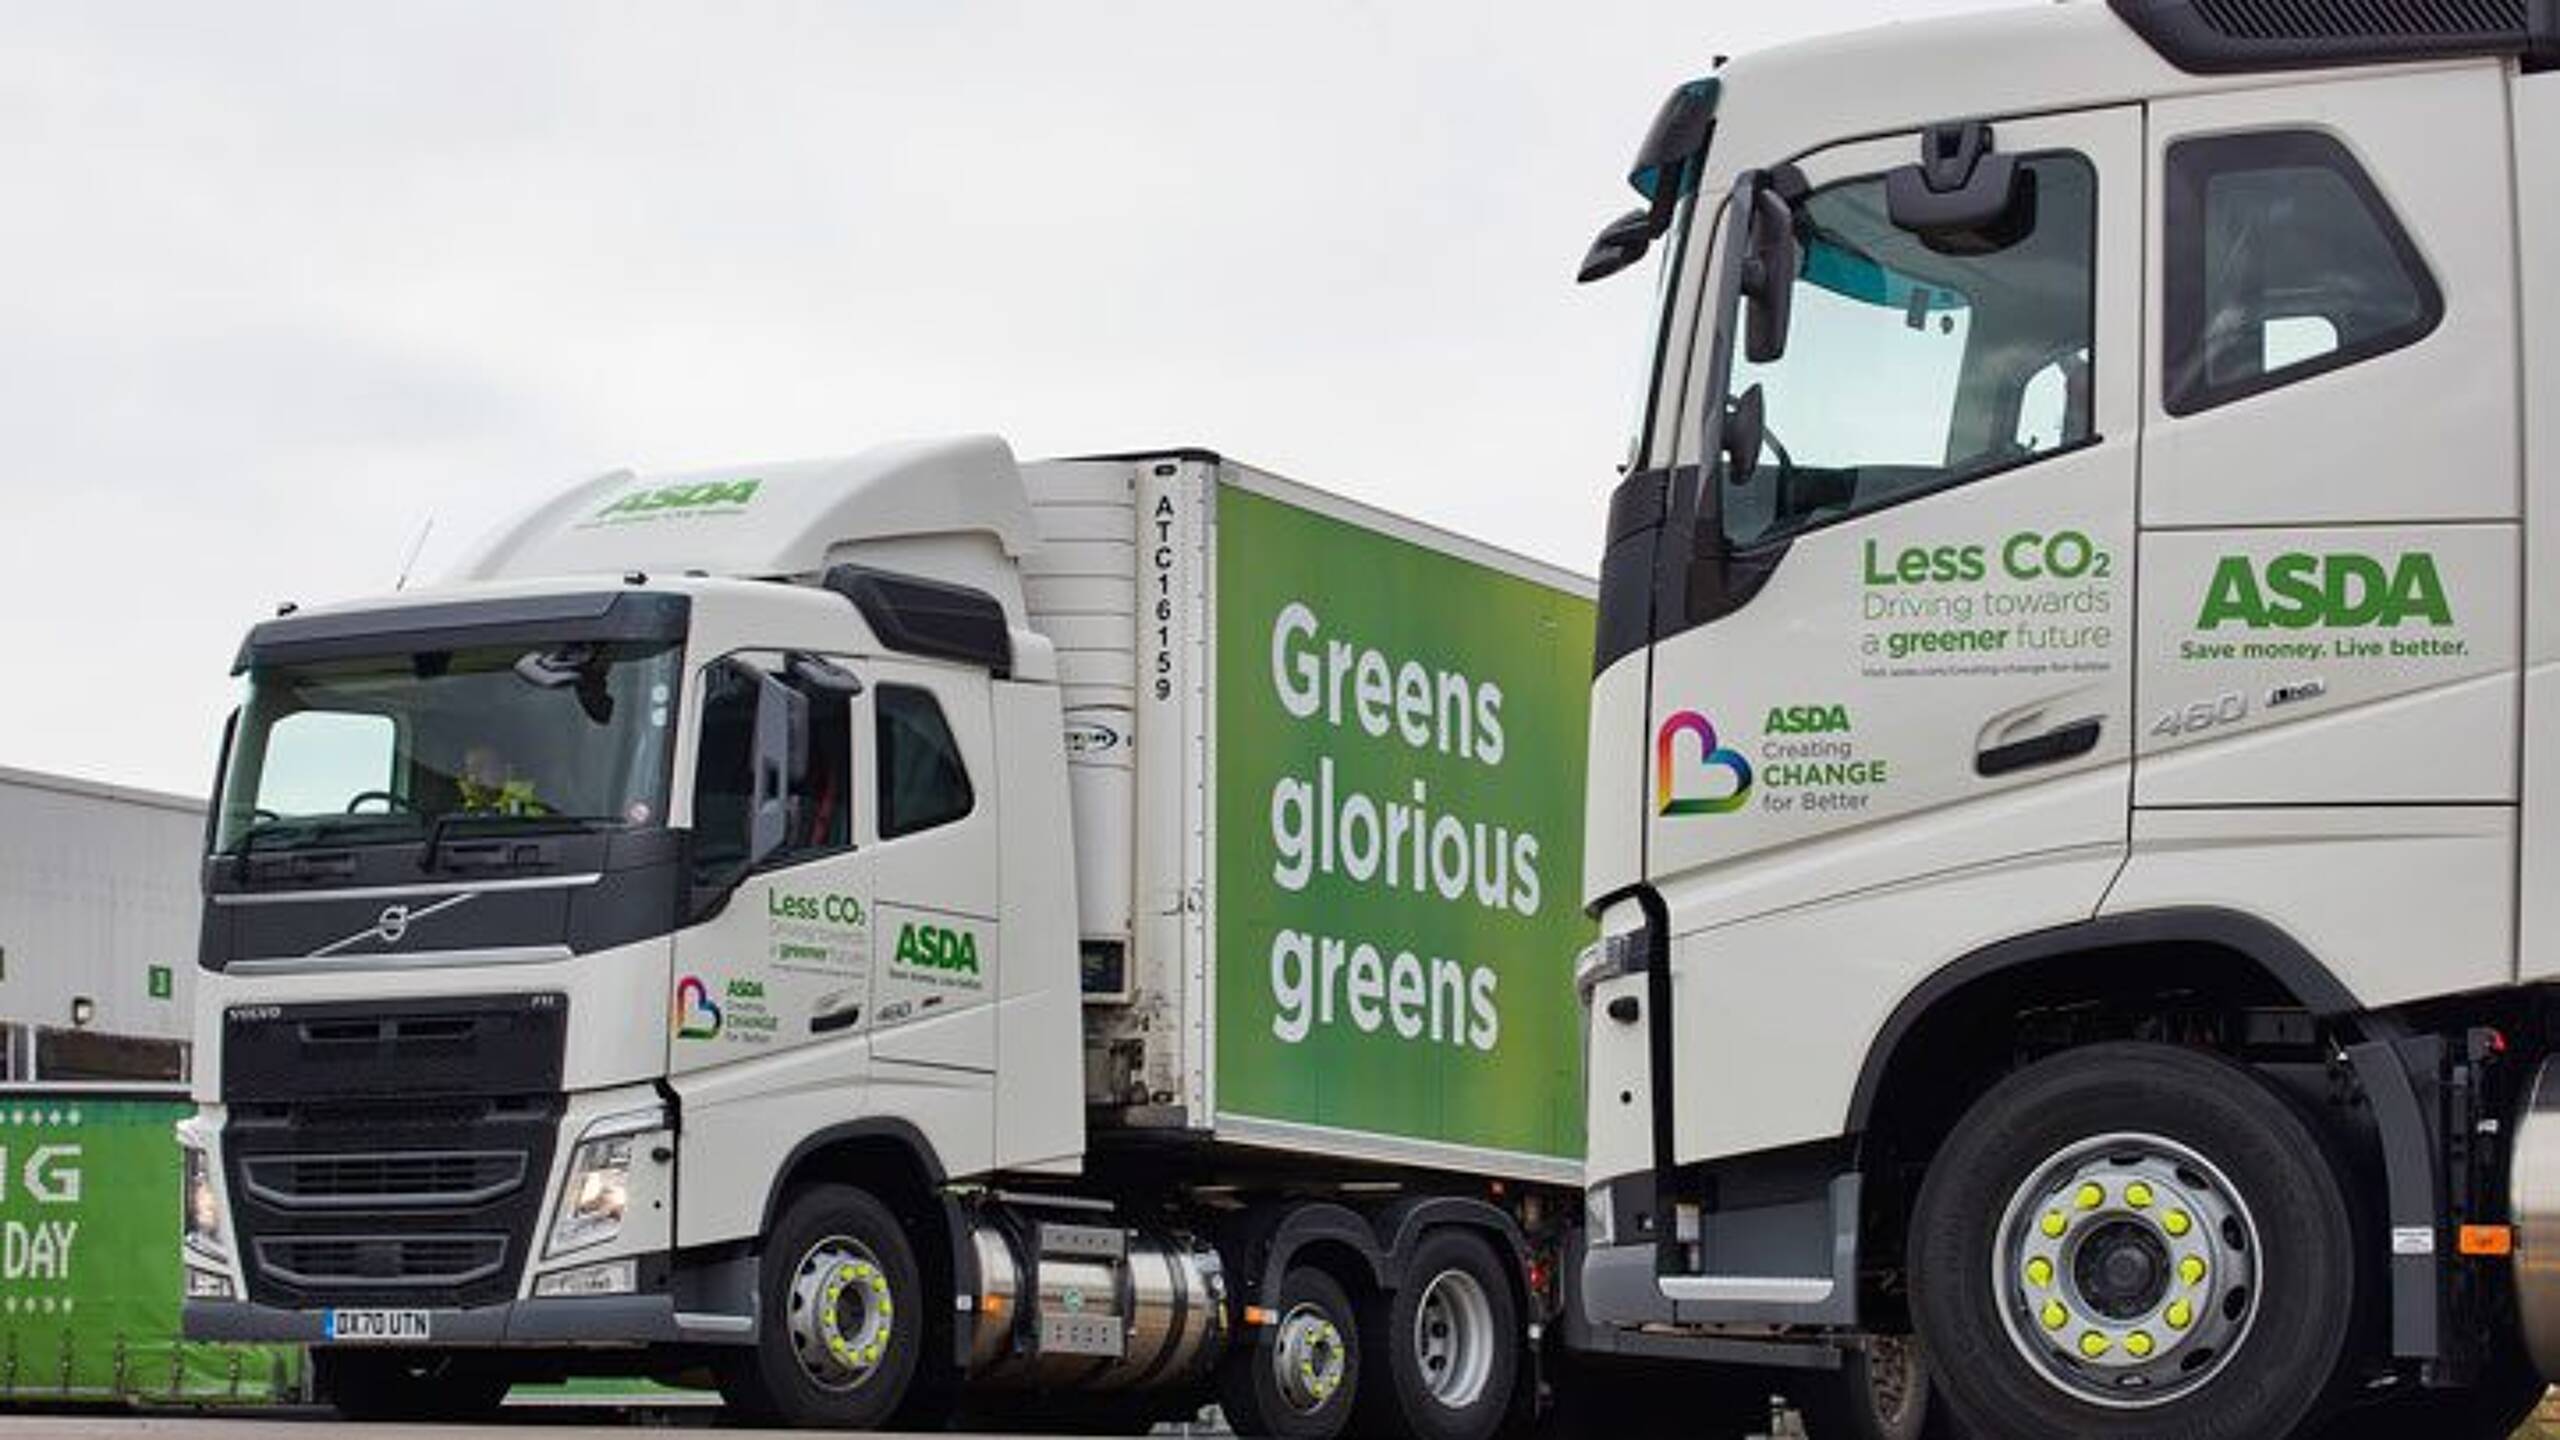 Asda reduces emissions by 16% over 12-month period